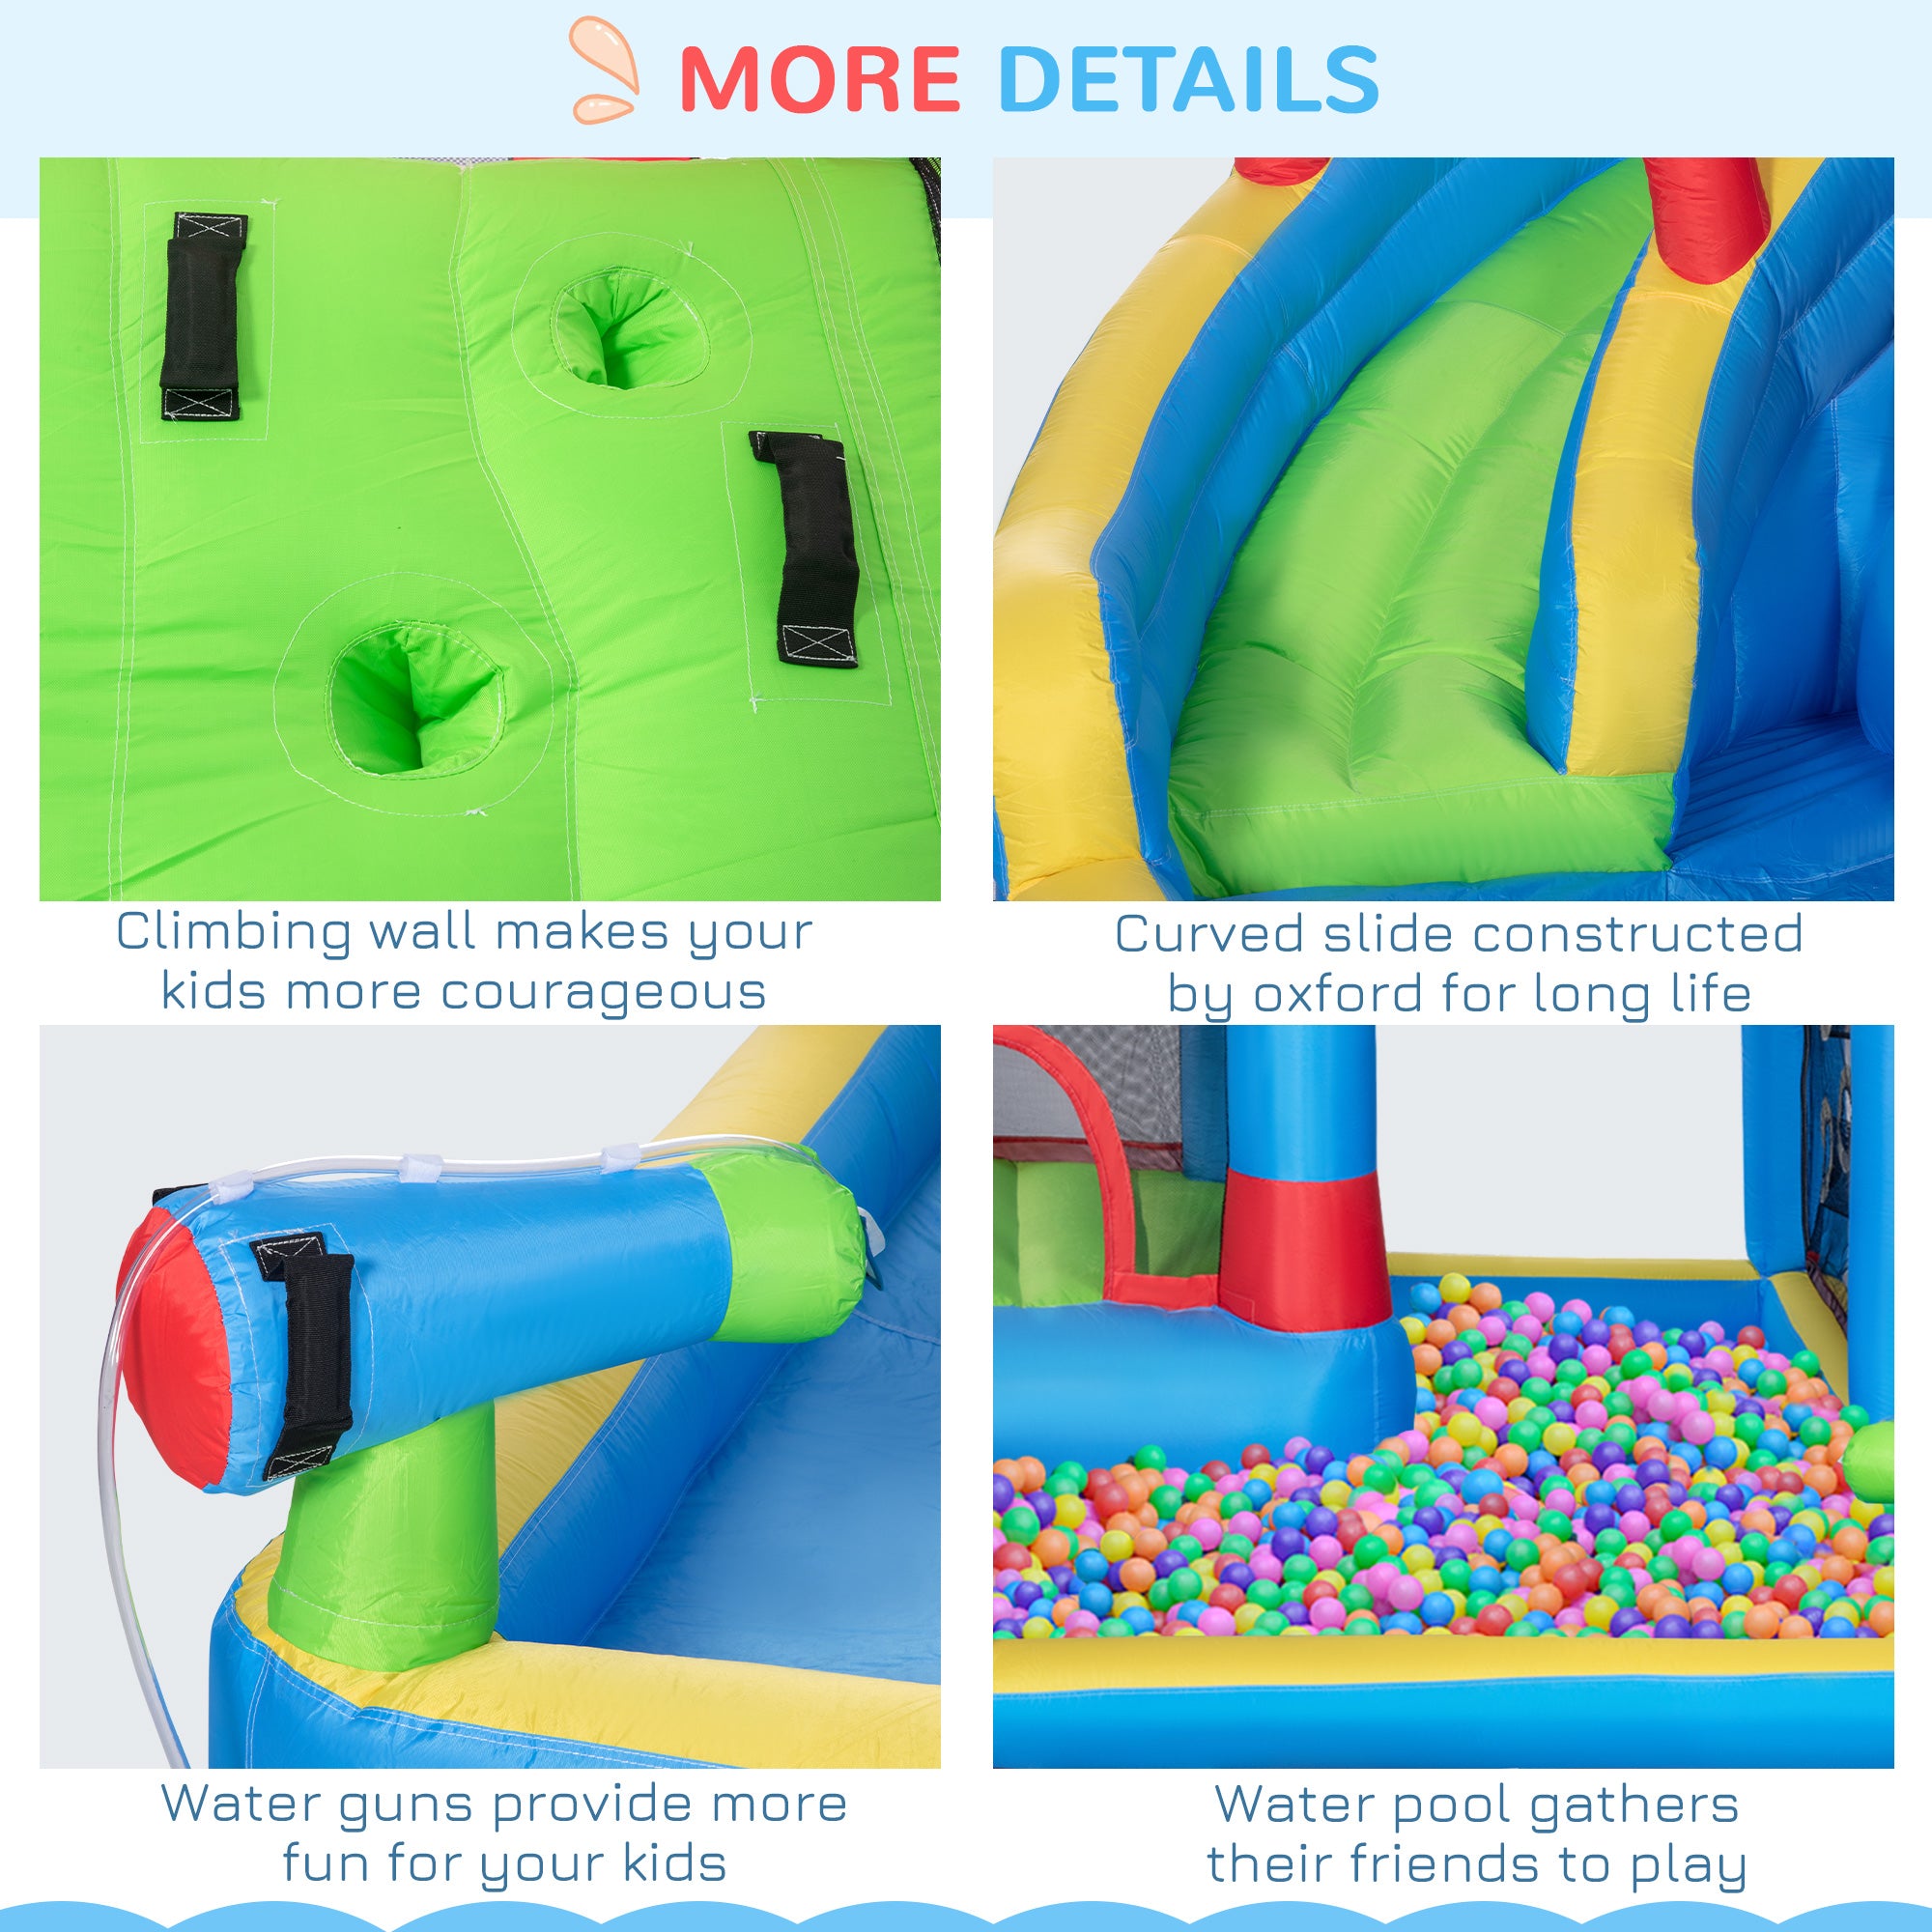 Outsunny 5 in 1 Kids Bounce Castle Large Castle Style Inflatable House Slide Trampoline Pool Water Gun Climbing Wall for Kids Age 3-8